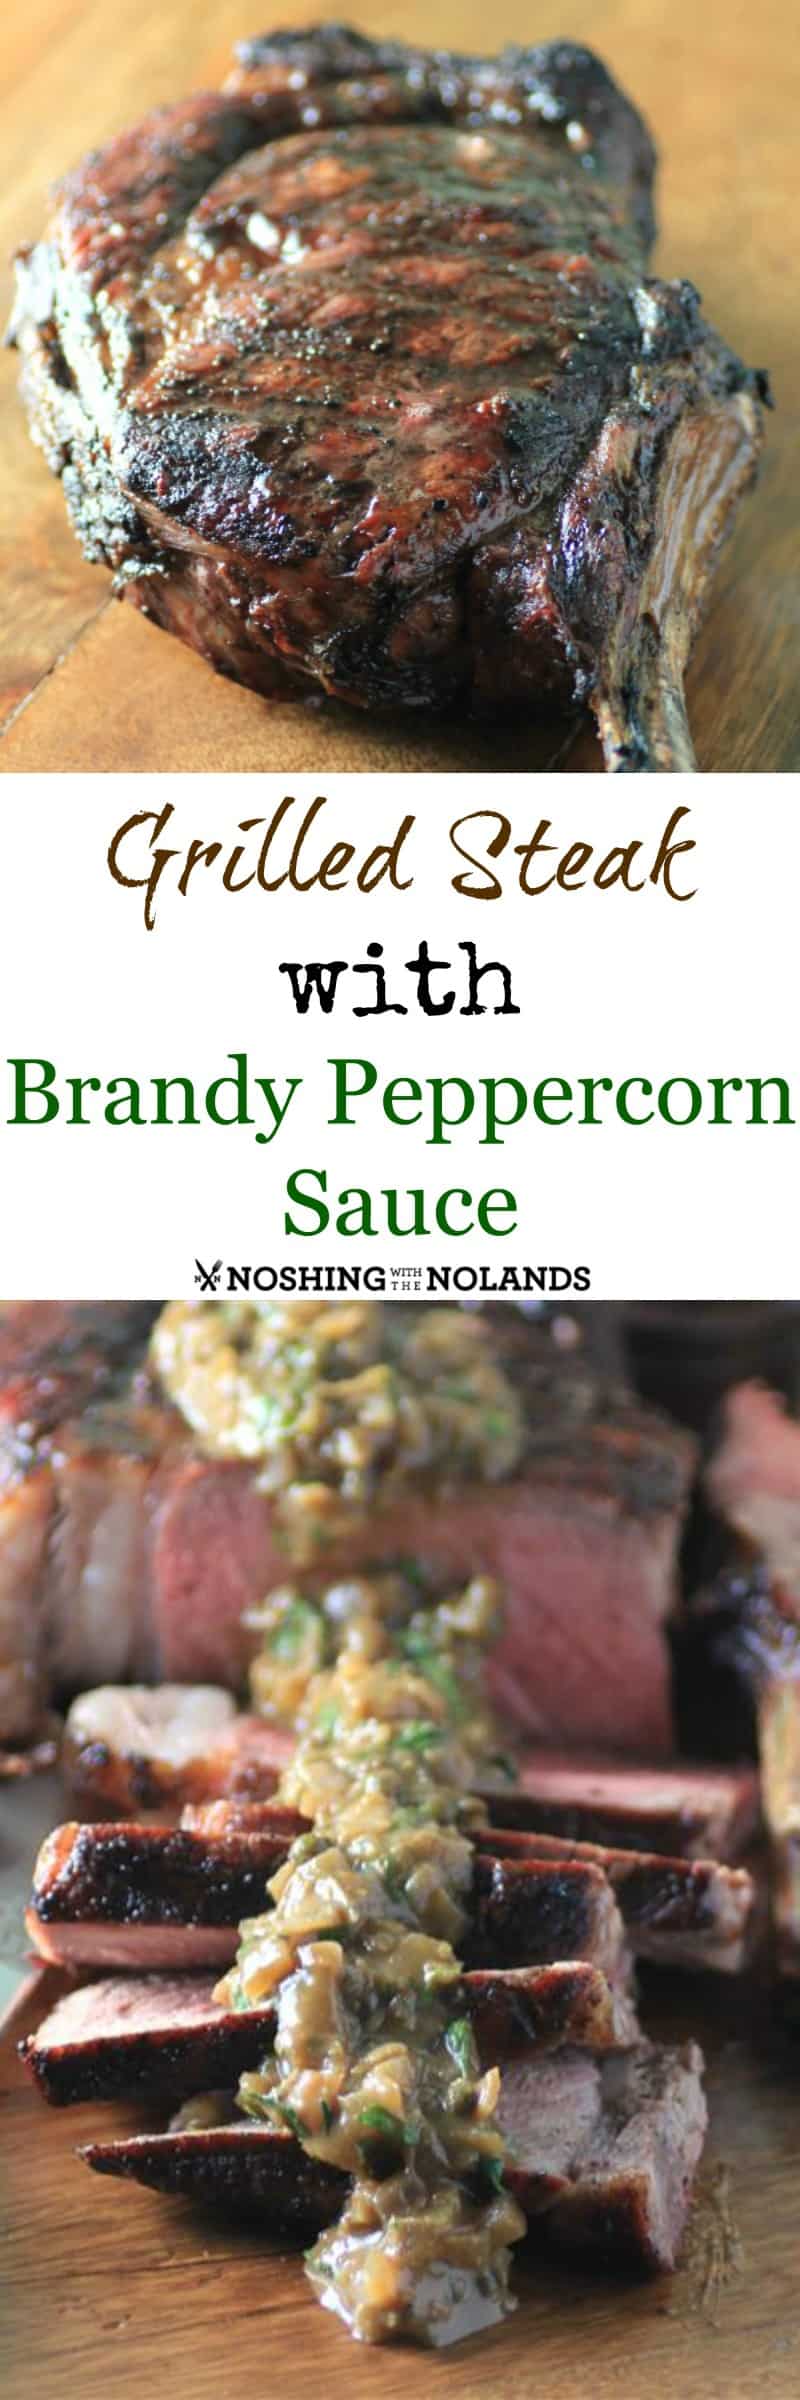 Grilled Steak with Brandy Peppercorn Sauce